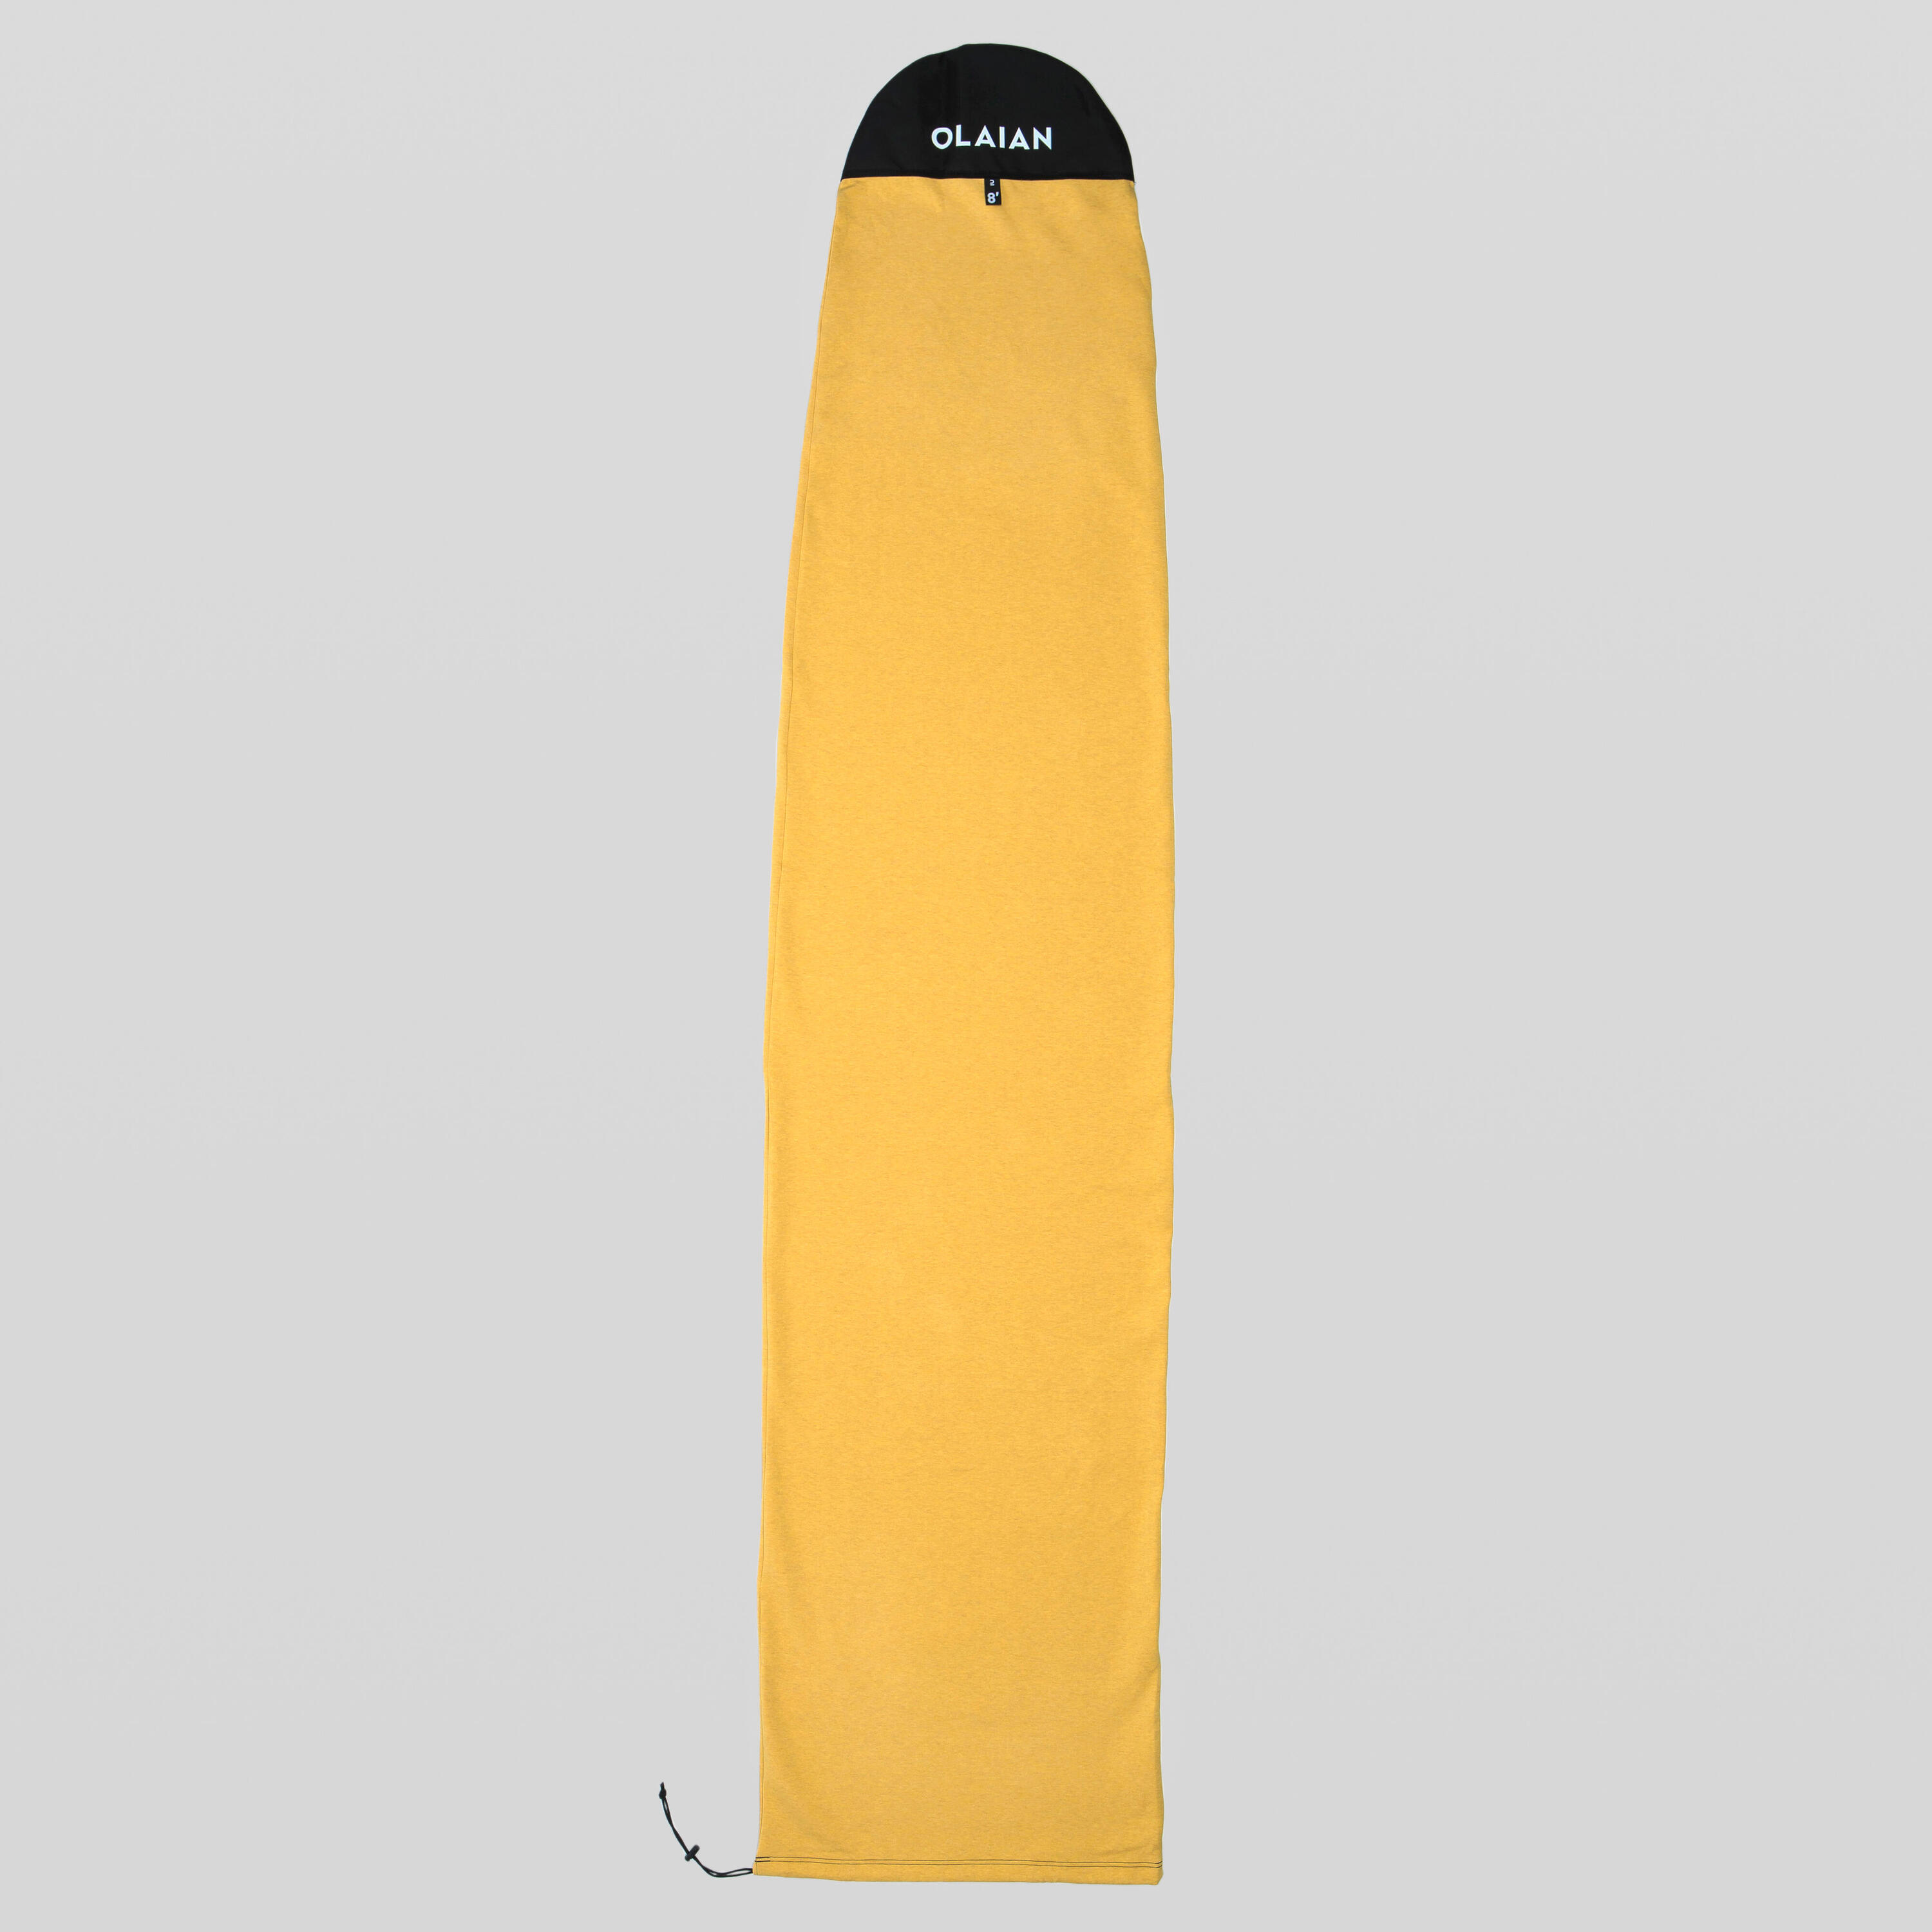 SURFING SOCK COVER for boards up to 8'2” max. 1/6